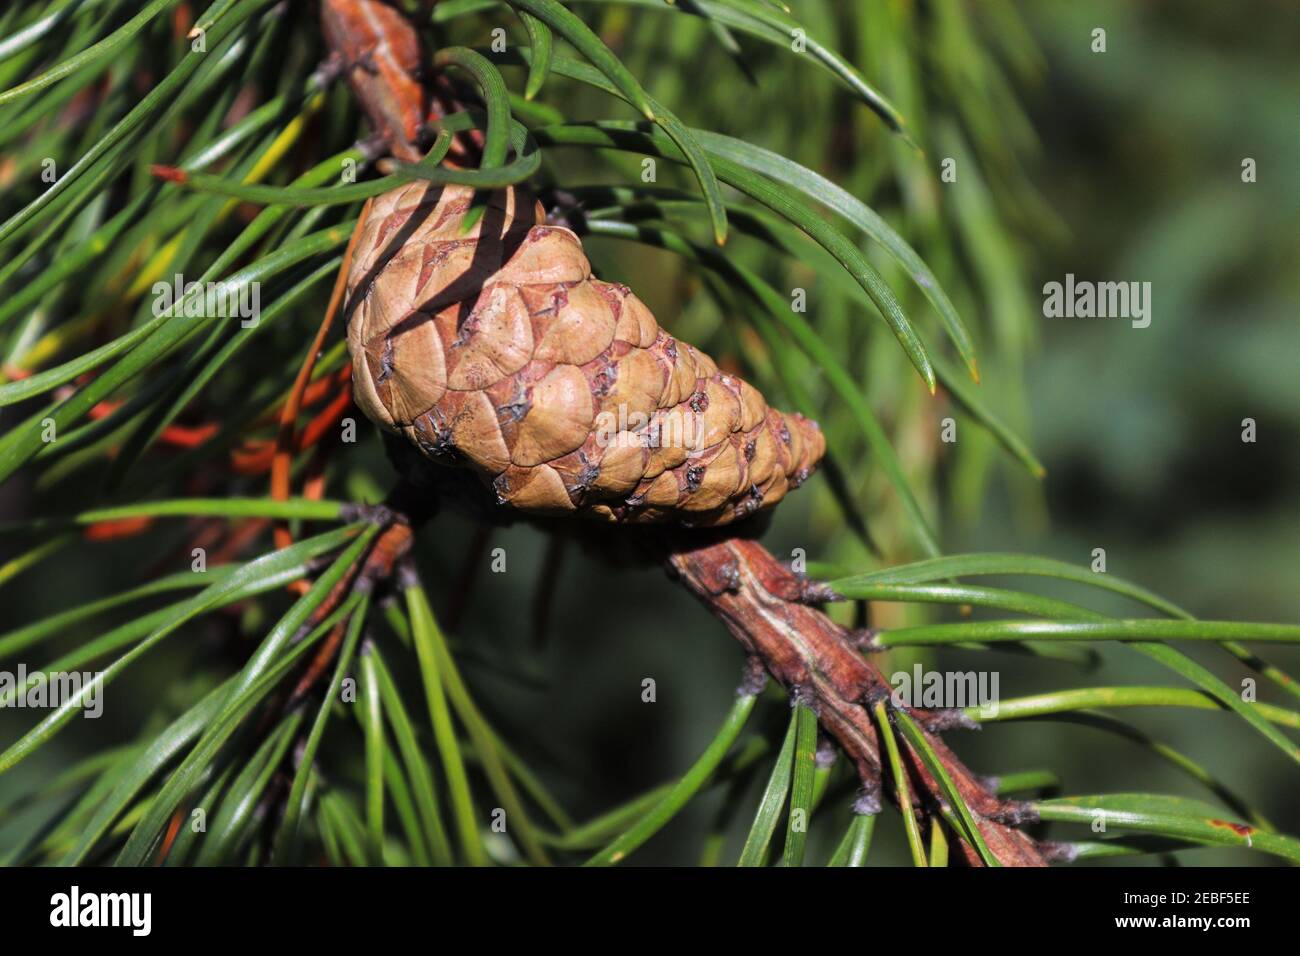 An older but closed pine cone on a branch Stock Photo